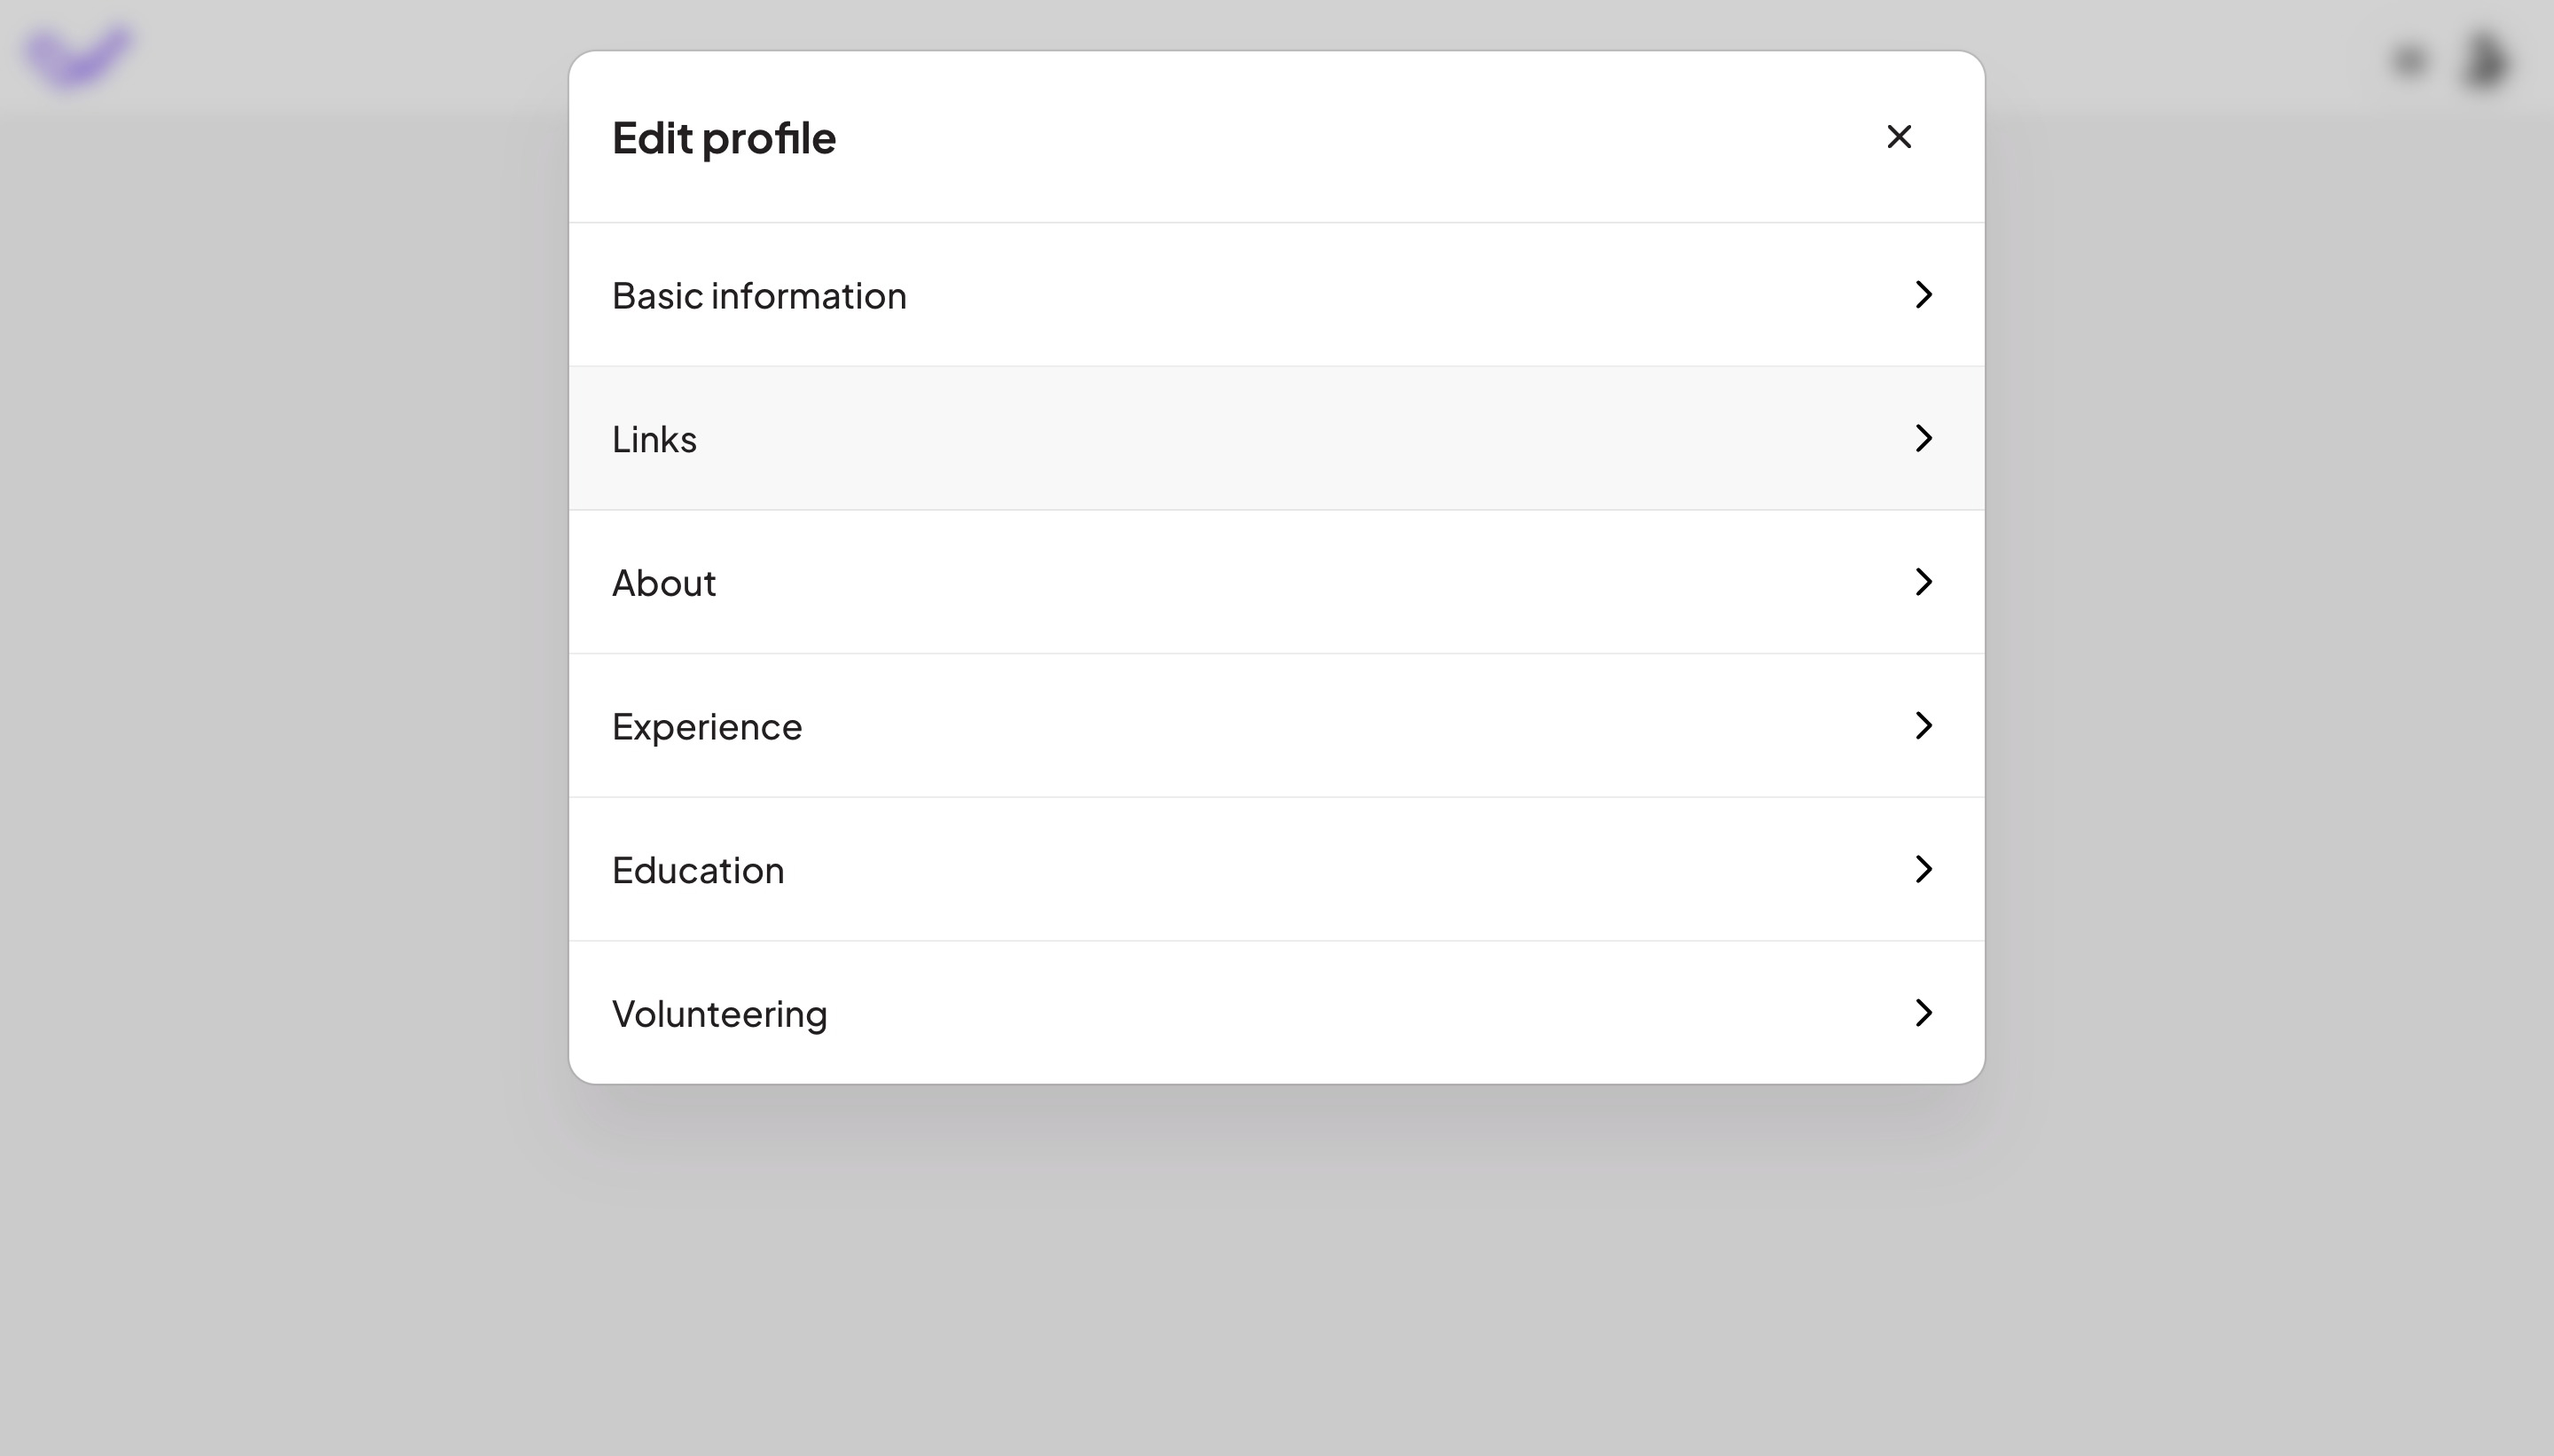 Links section in the edit profile view